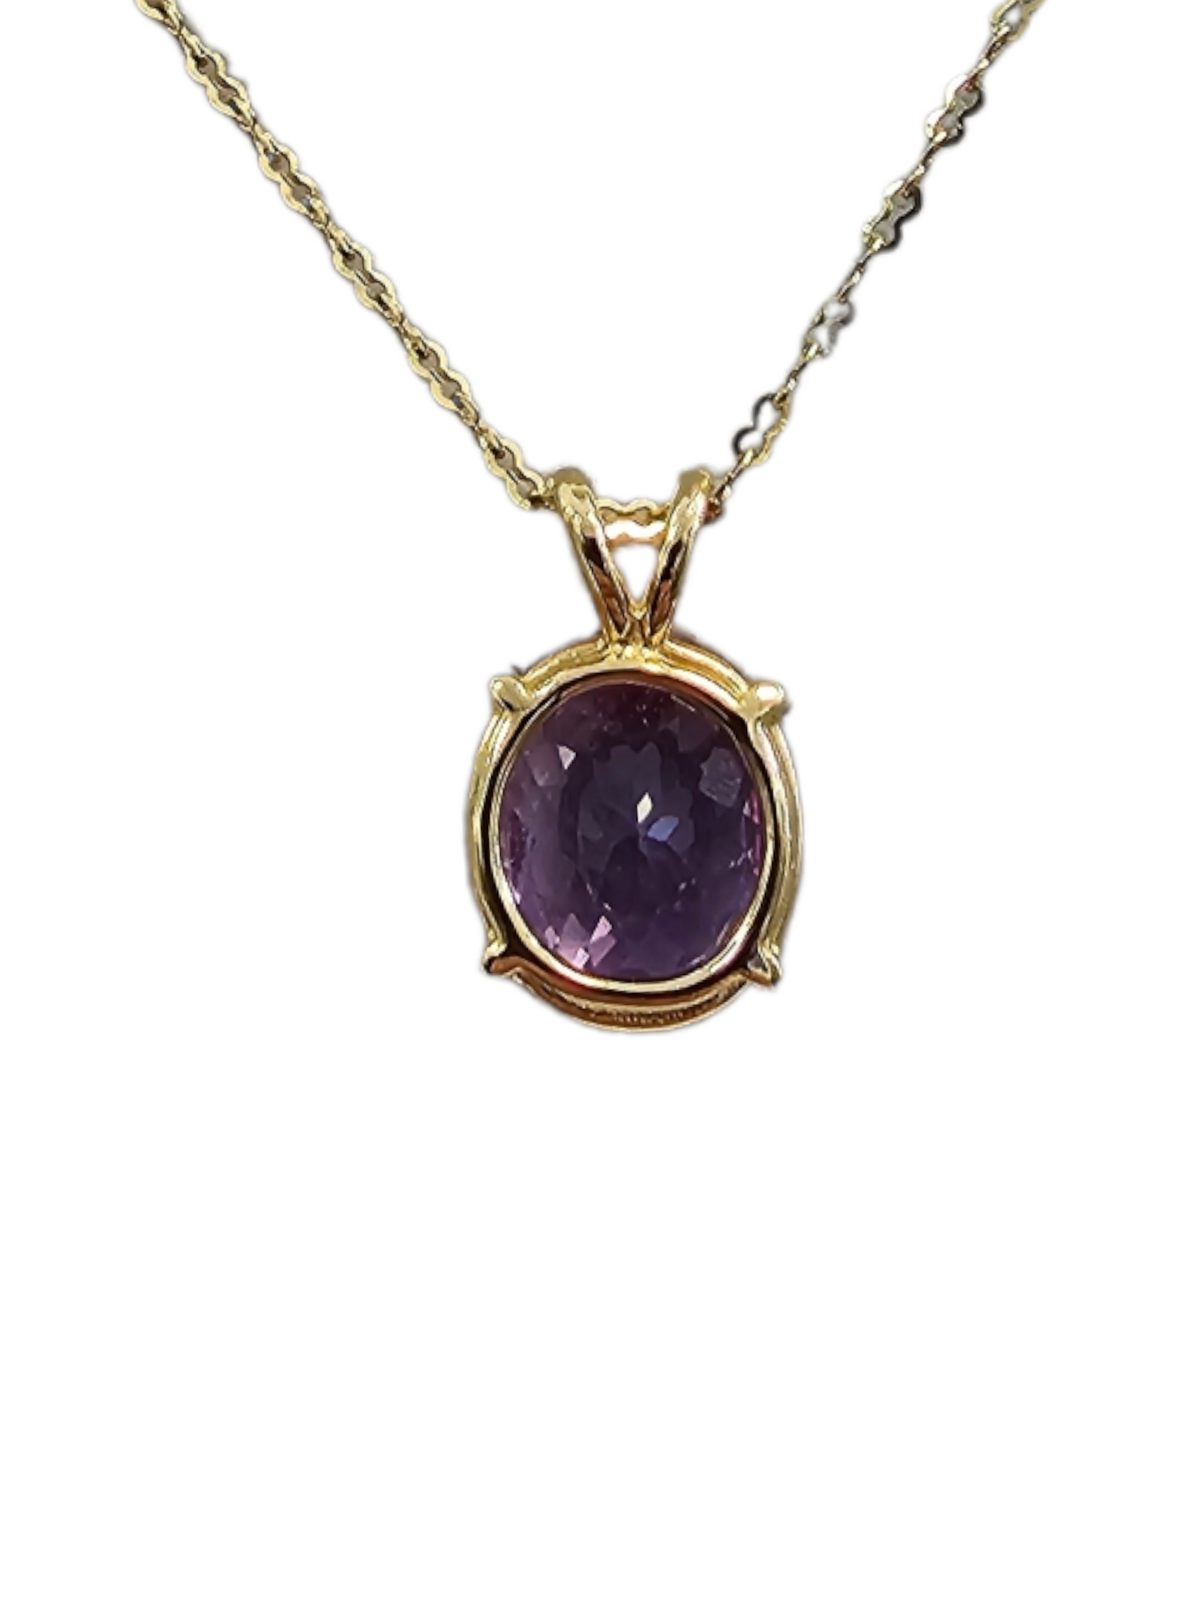 Amethyst Pendant Necklace, 14kt Yellow gold